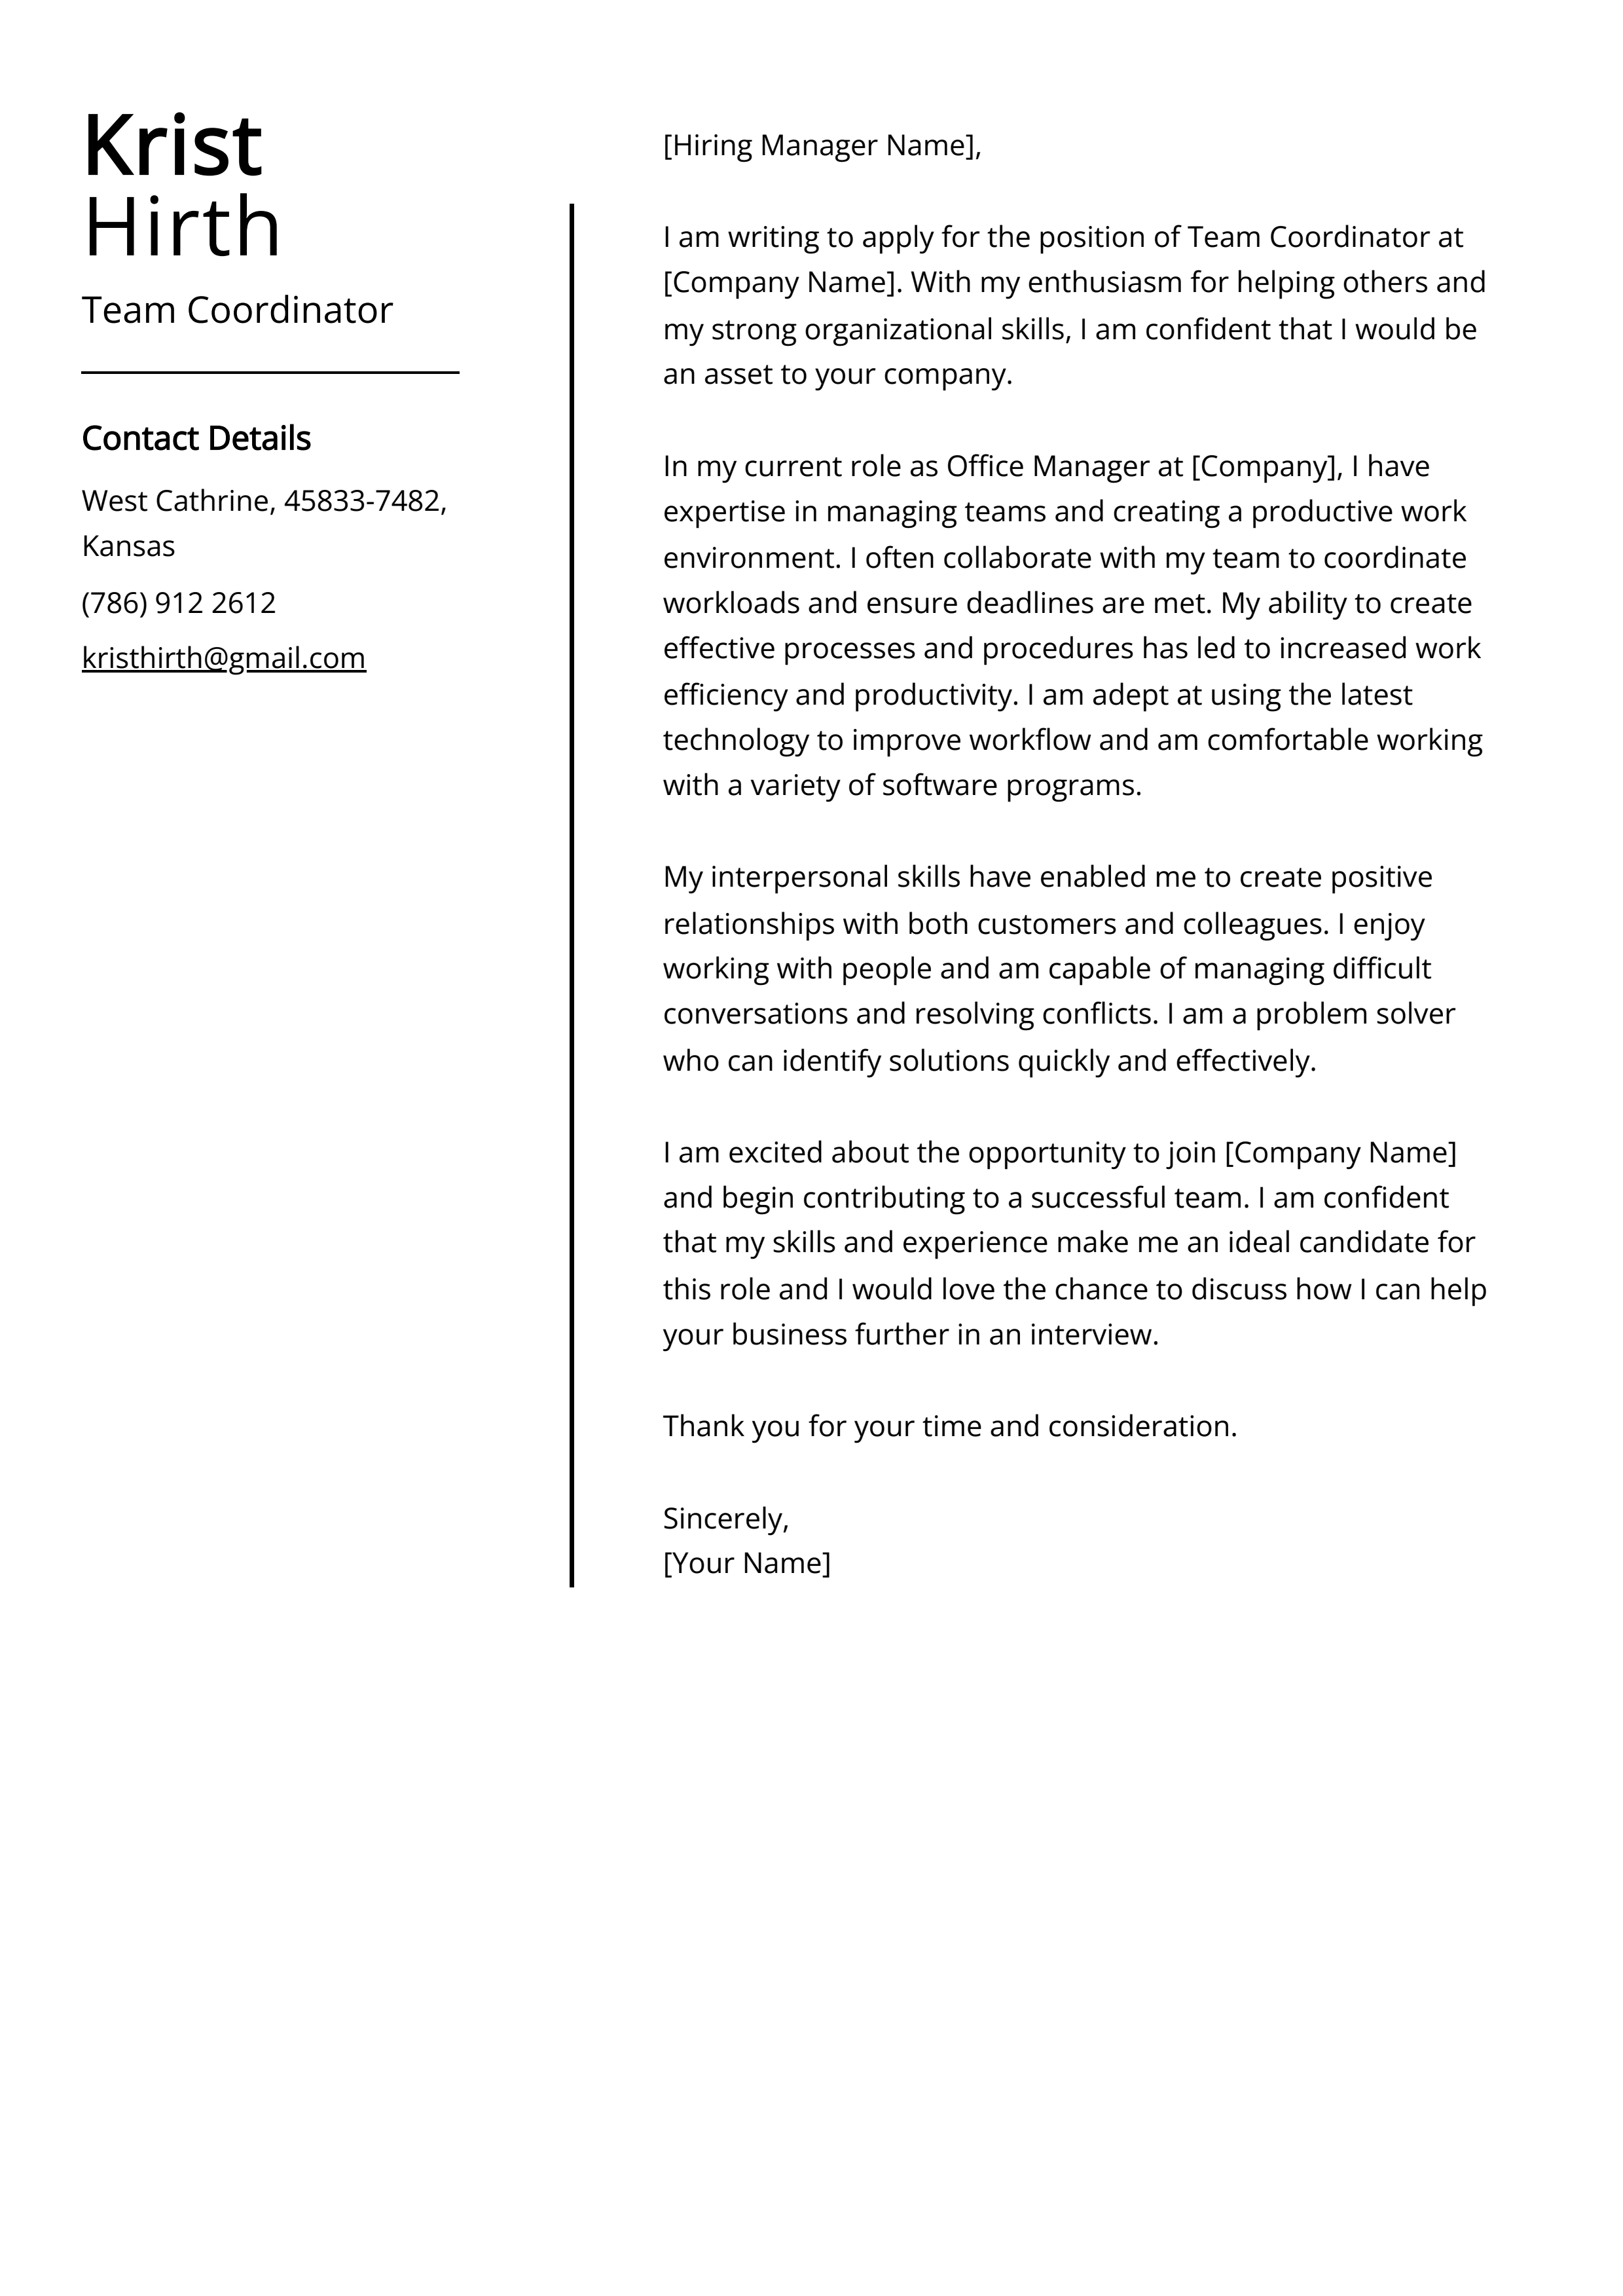 Team Coordinator Cover Letter Example